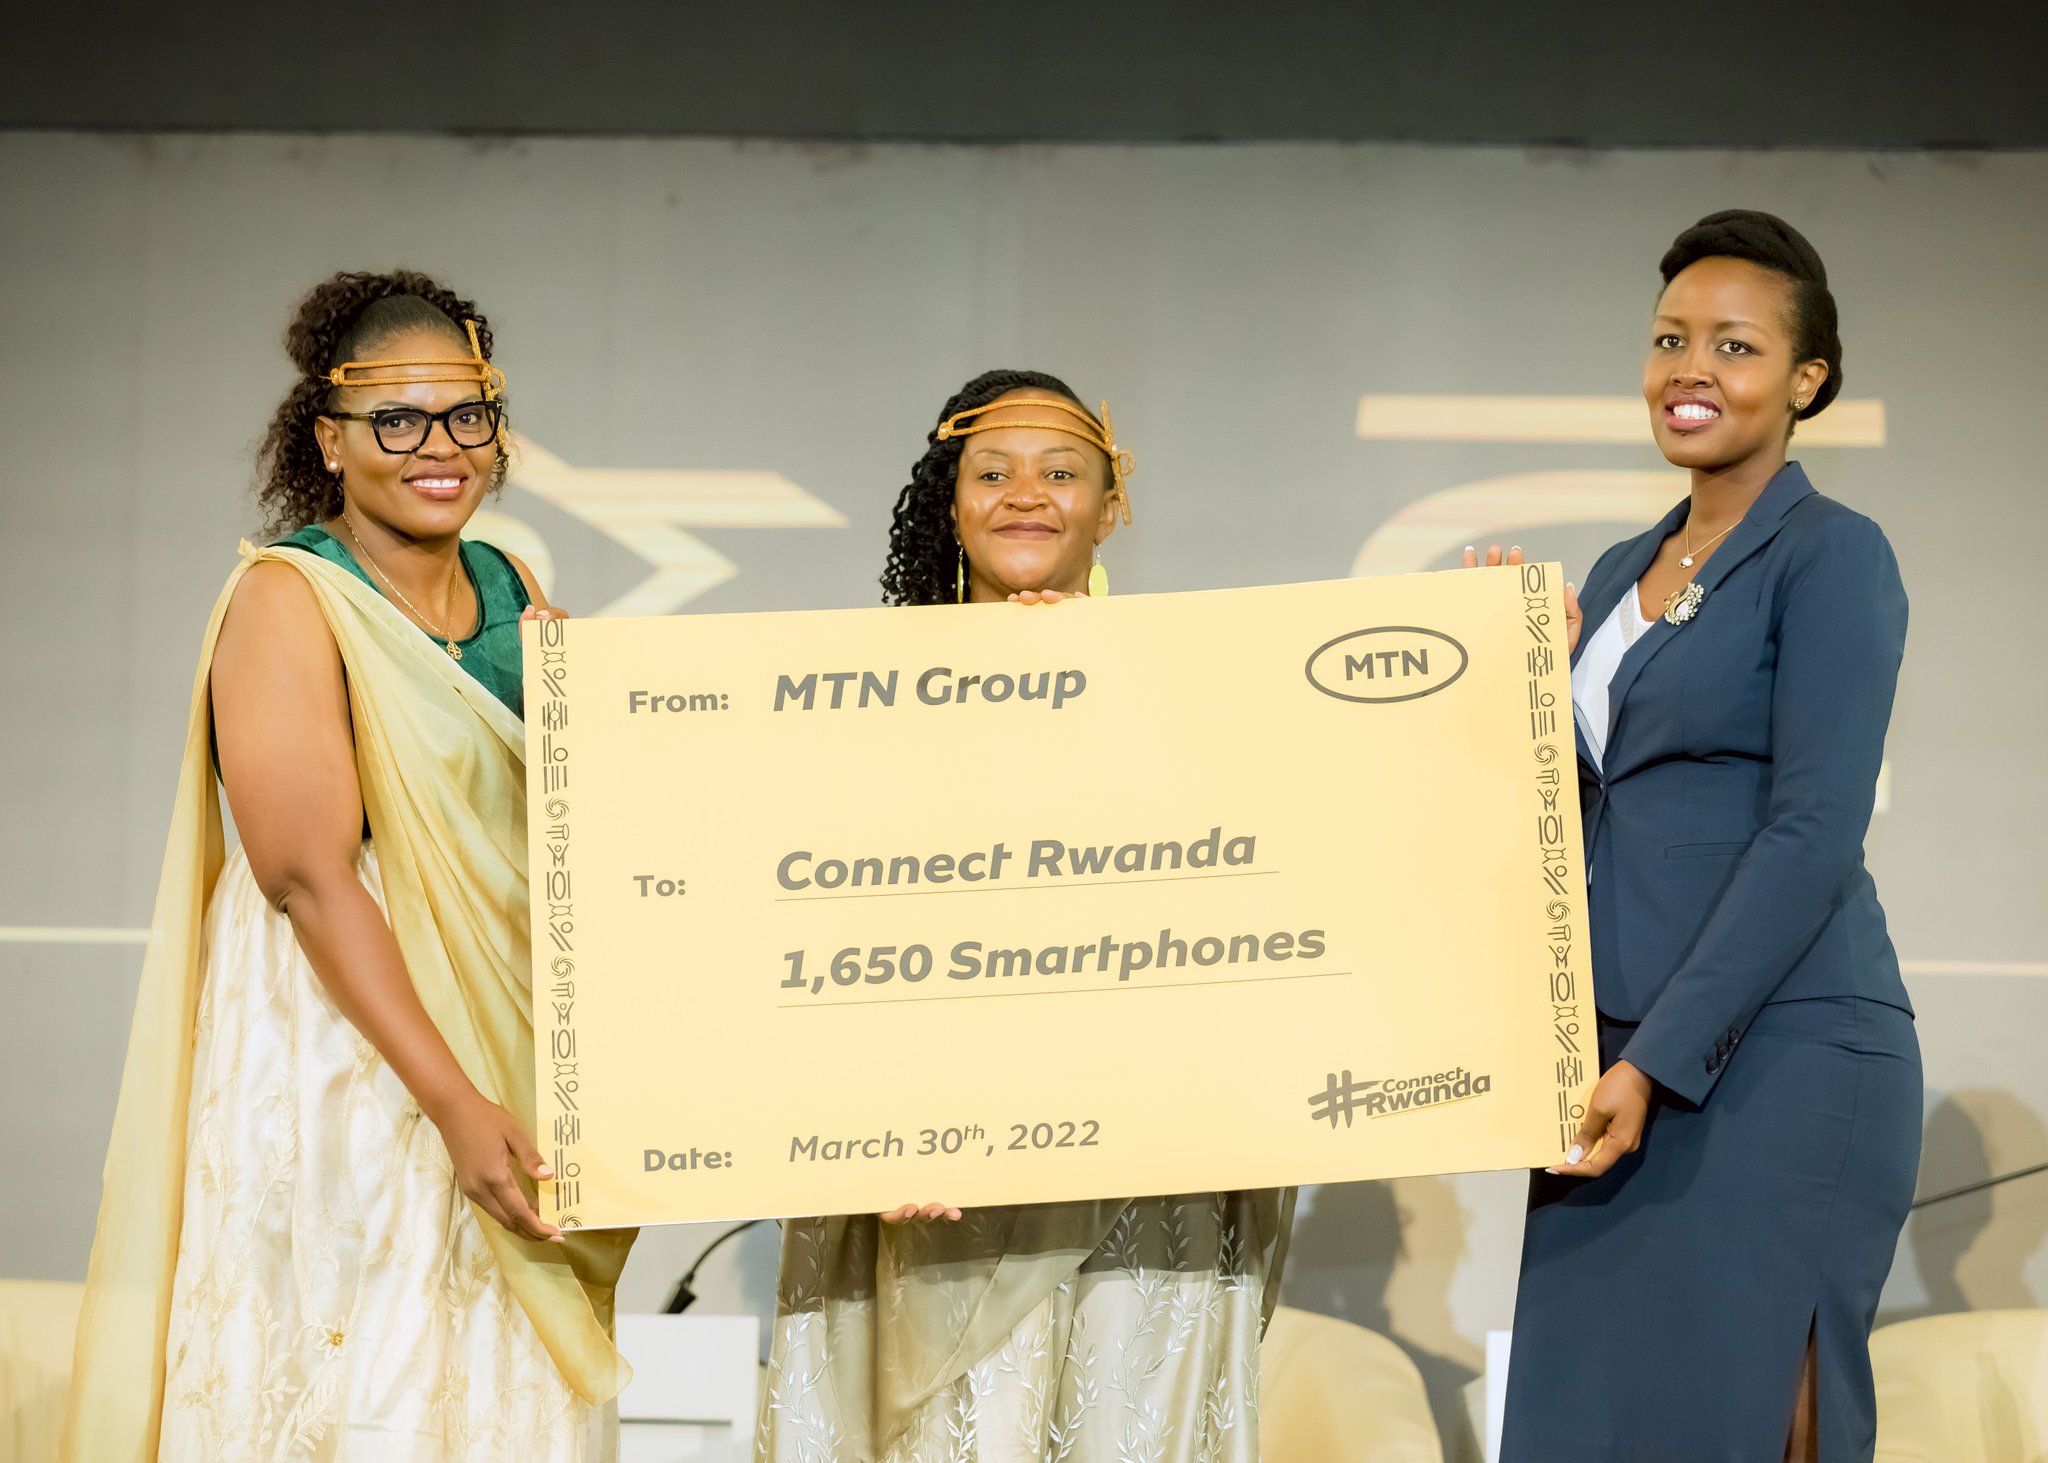 (L-R) Yolanda Cuba, the MTN Vice President in South and Eastern Africa; Mitwa Ng'ambi, the CEO of MTN Rwanda; hand over a cheque to Minister of ICT and Innovation Paula Ingabire on March 30. 